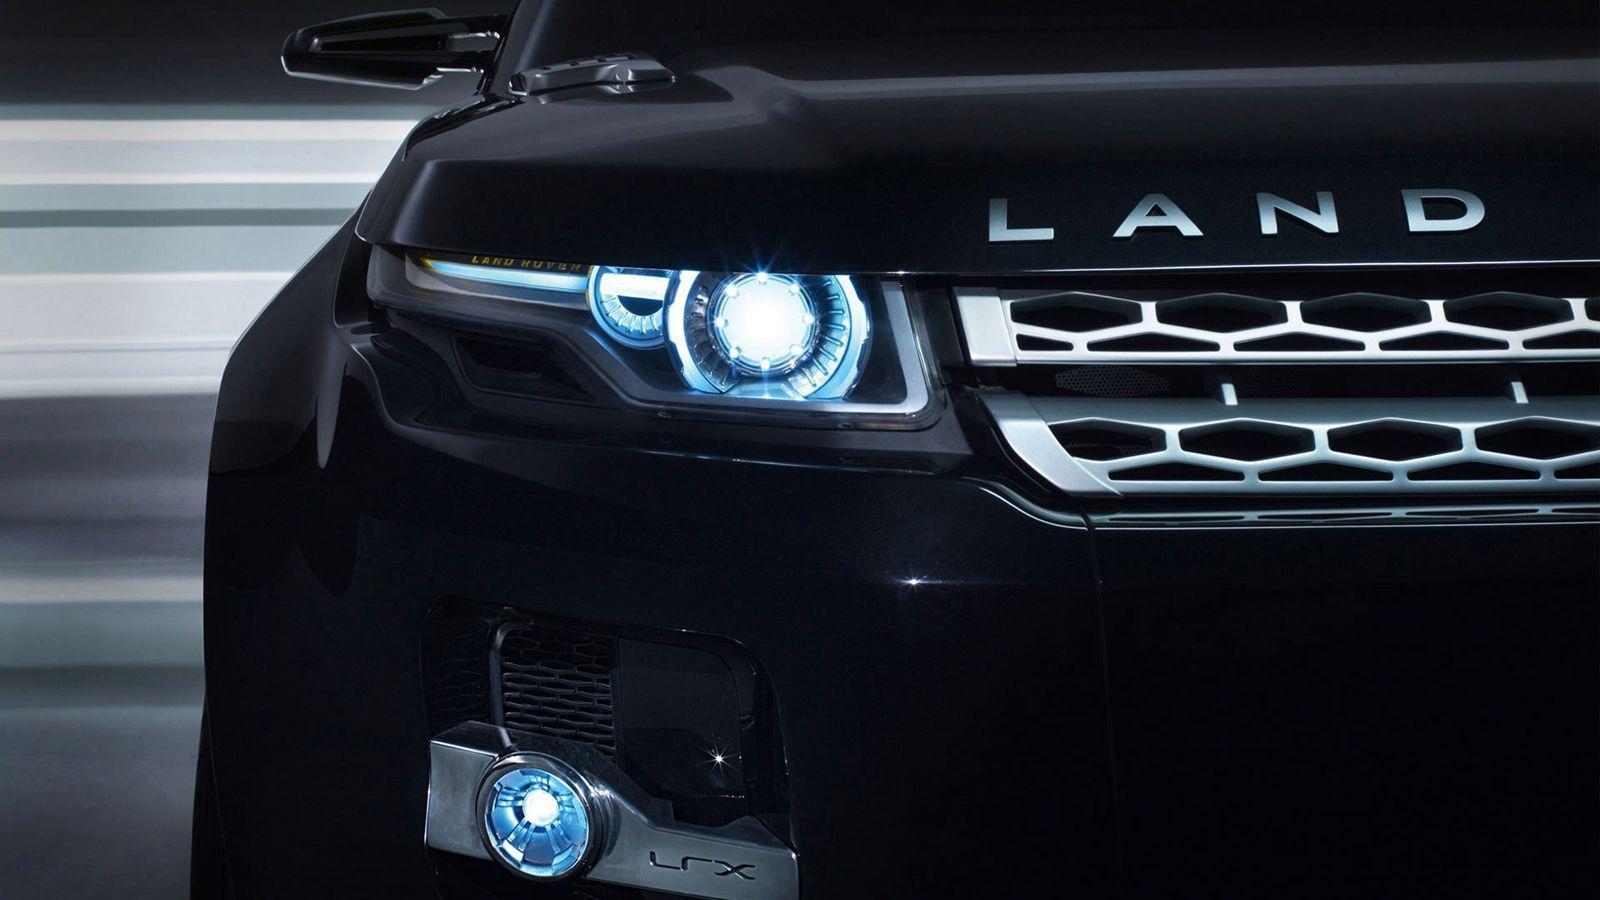 Black Land Rover Front HD Wallpaper. Land Rover